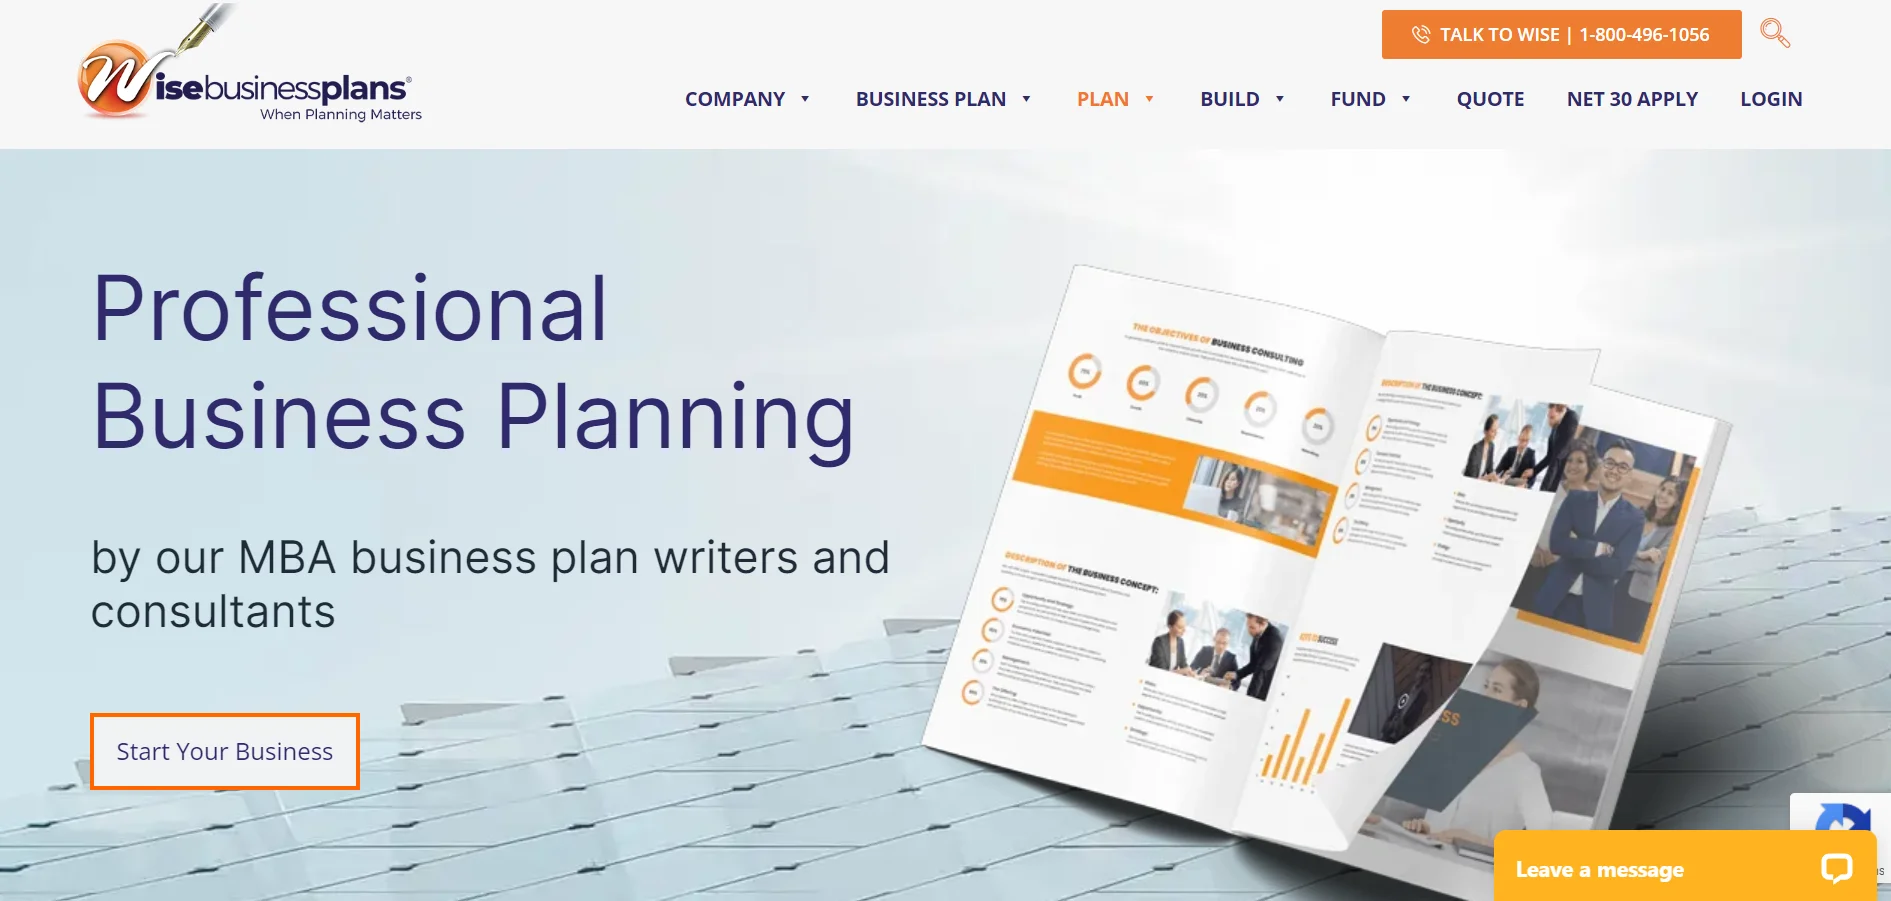 Wise Business Plans AI business plan generator